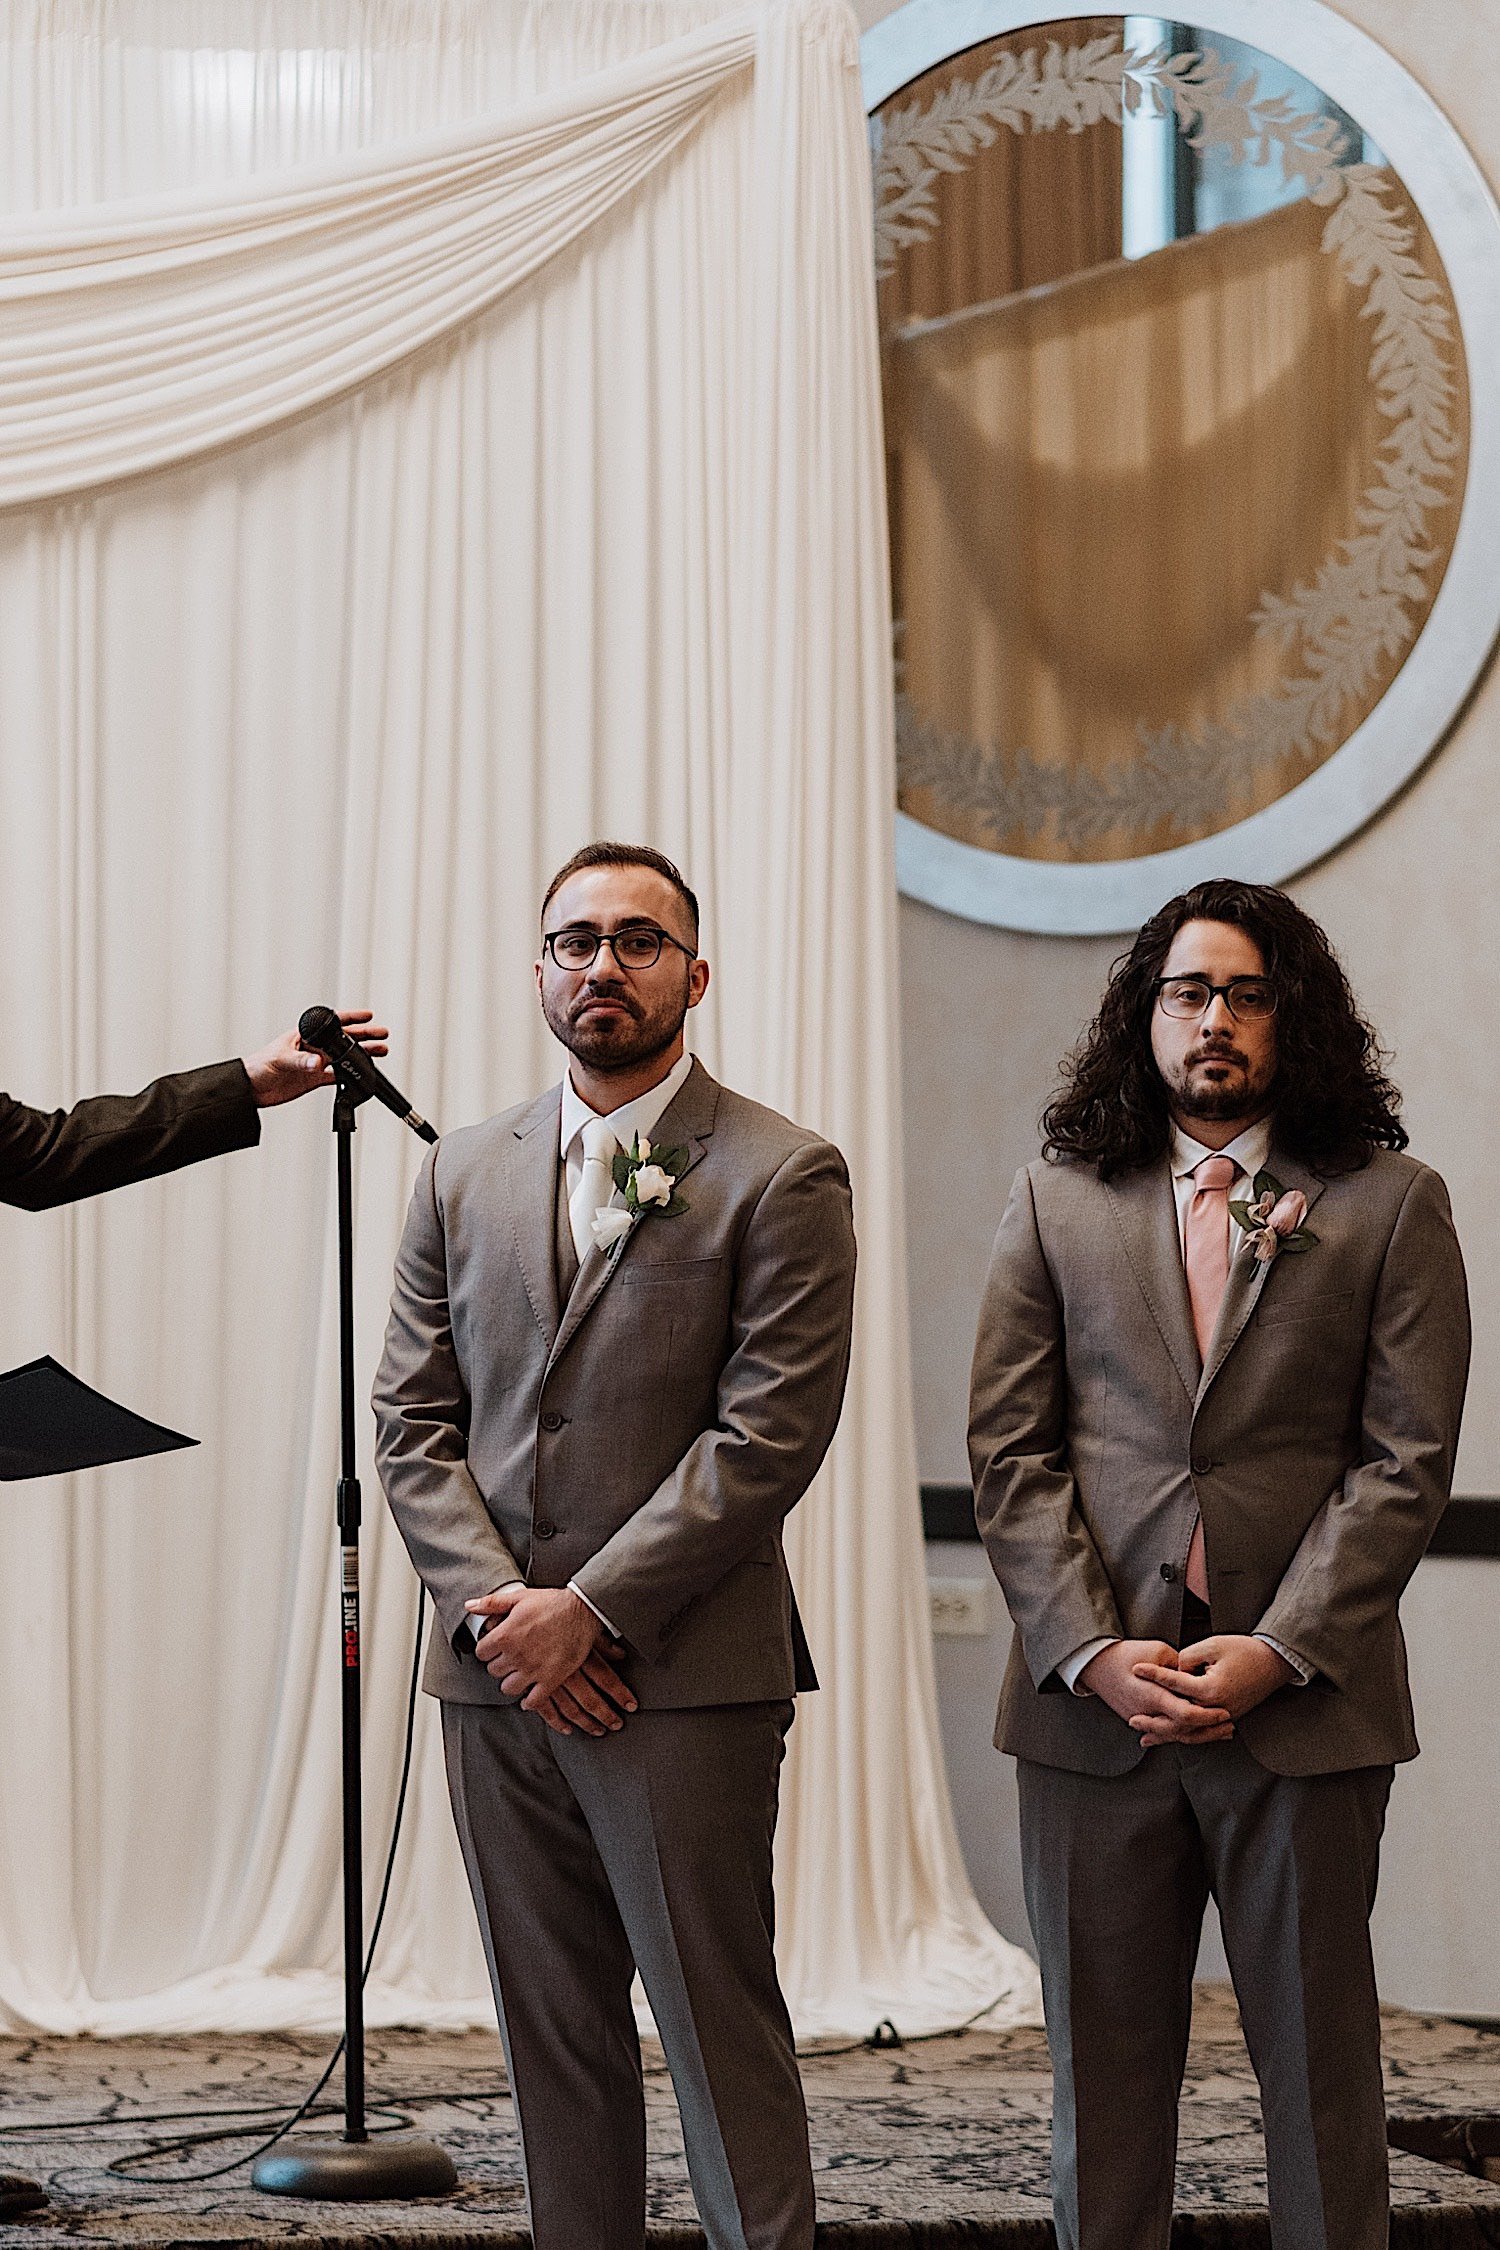 Groom starts to tear up as he sees his bride enter the ceremony space while standing next to his best man